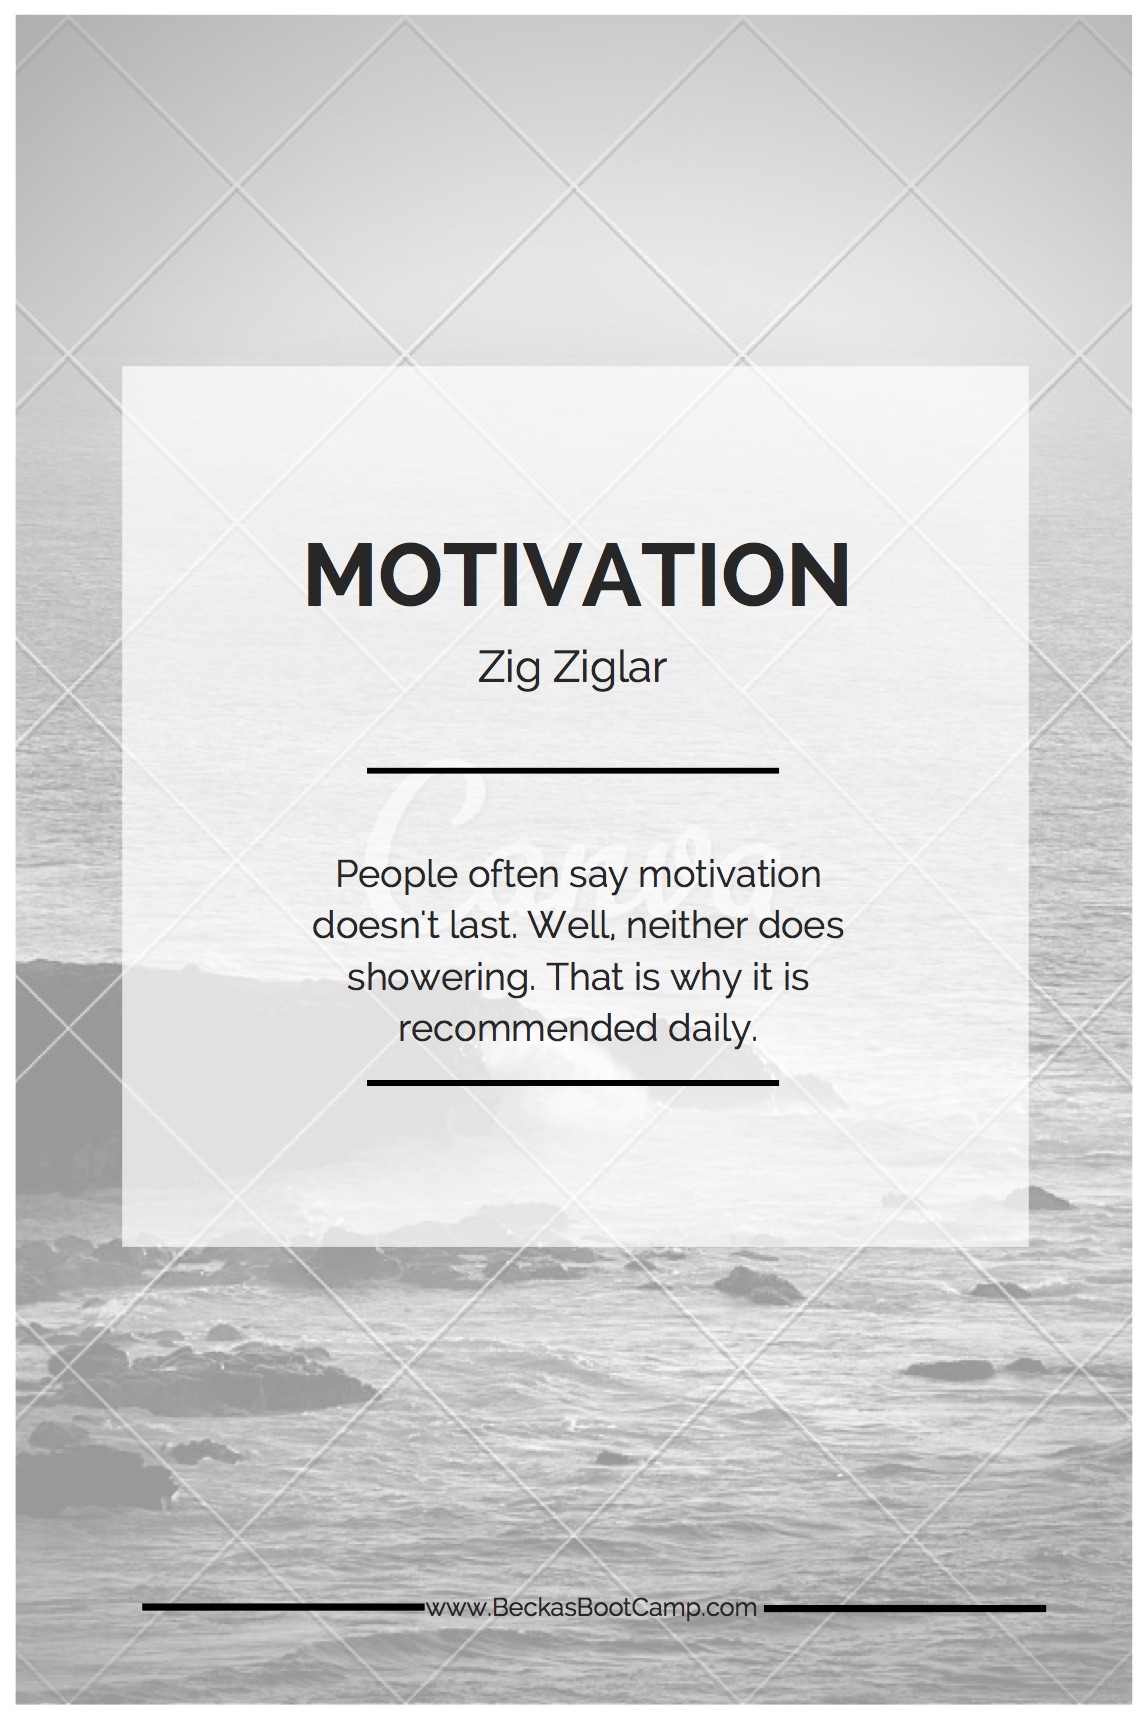 You need to shower daily, so yes, you need to find ways to motivate yourself daily. If you are not internally motivated, then find someone who will motivate you!